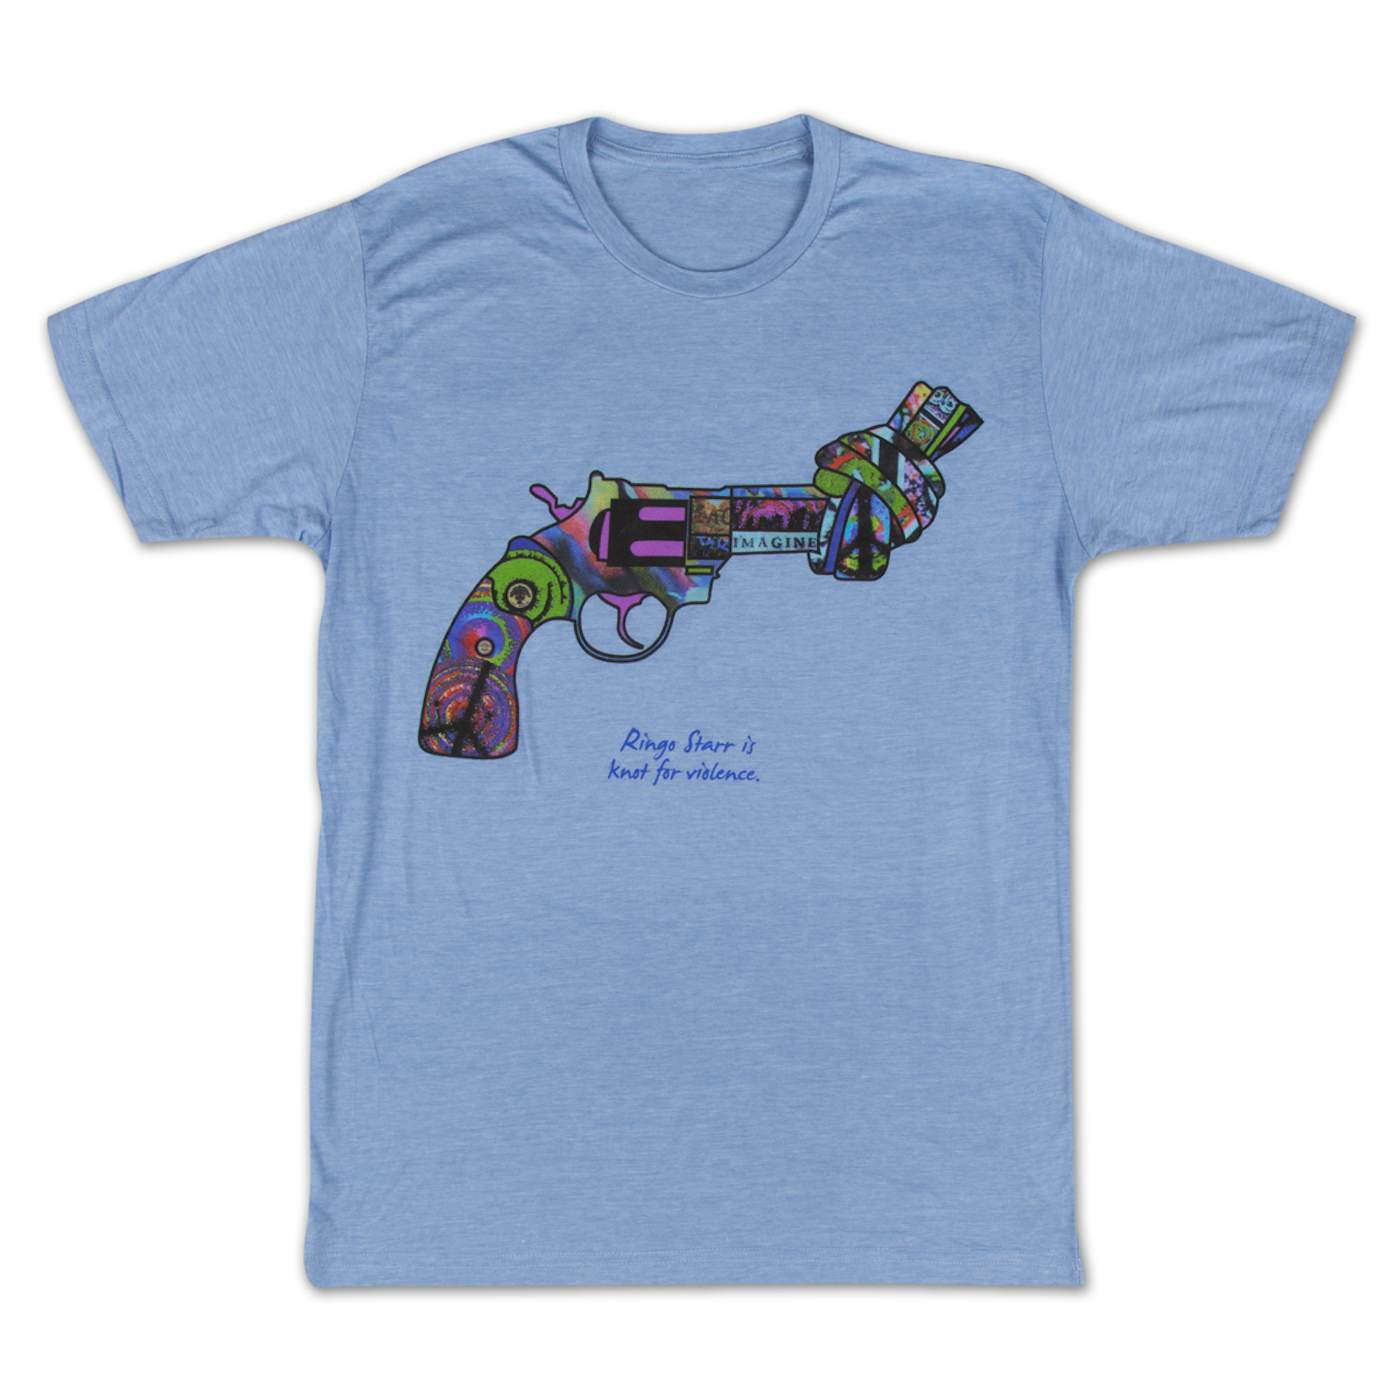 Ringo Starr Knot for Violence T-Shirt